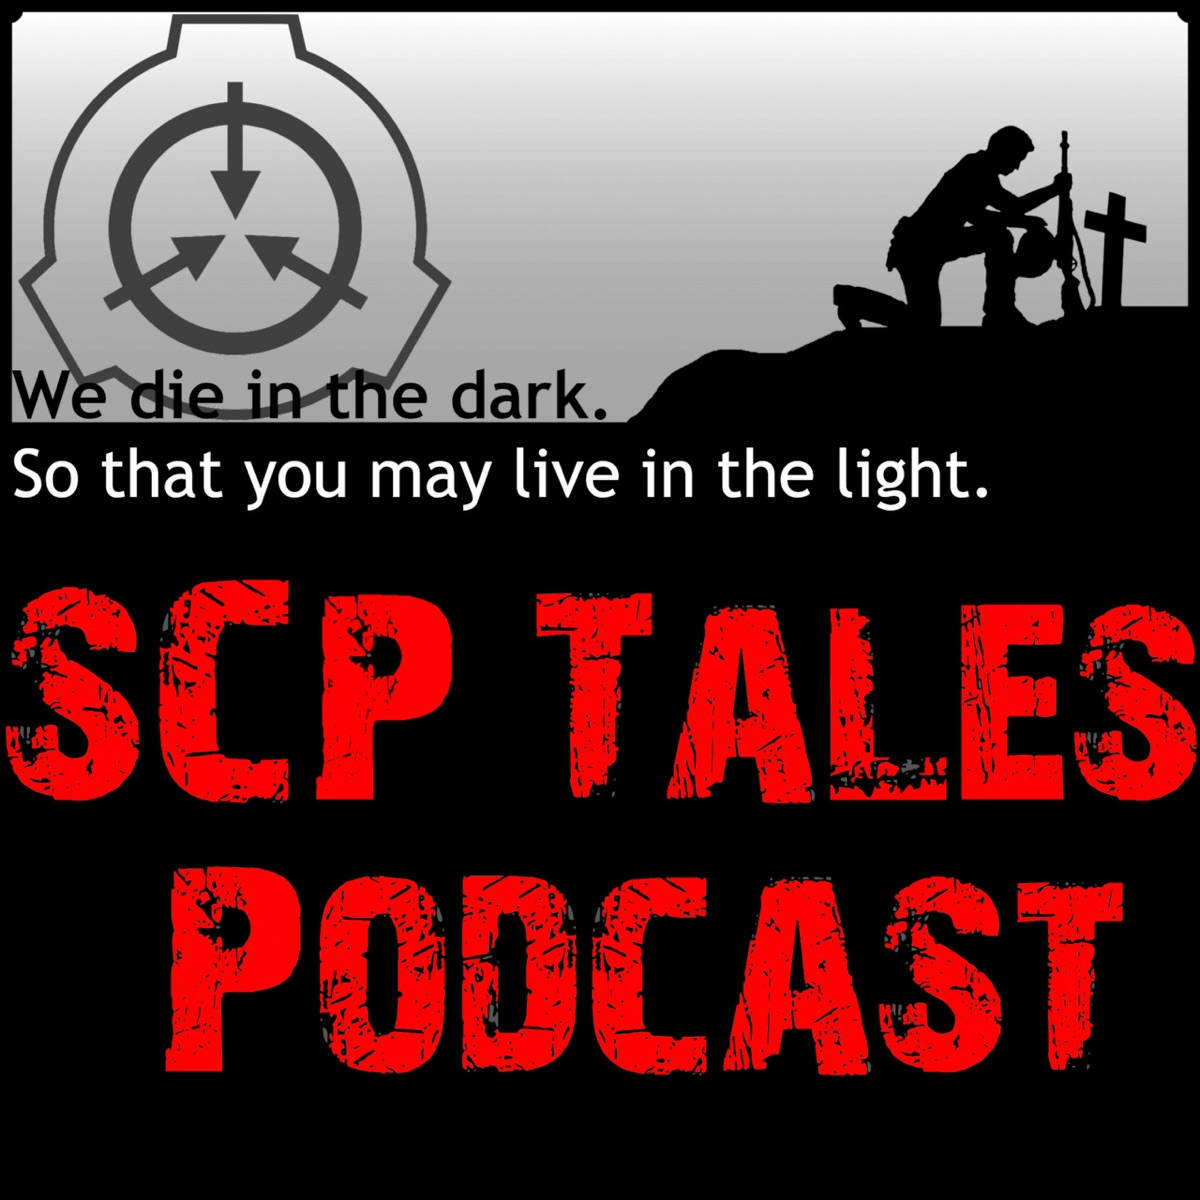 The SCP foundation log. on Apple Podcasts